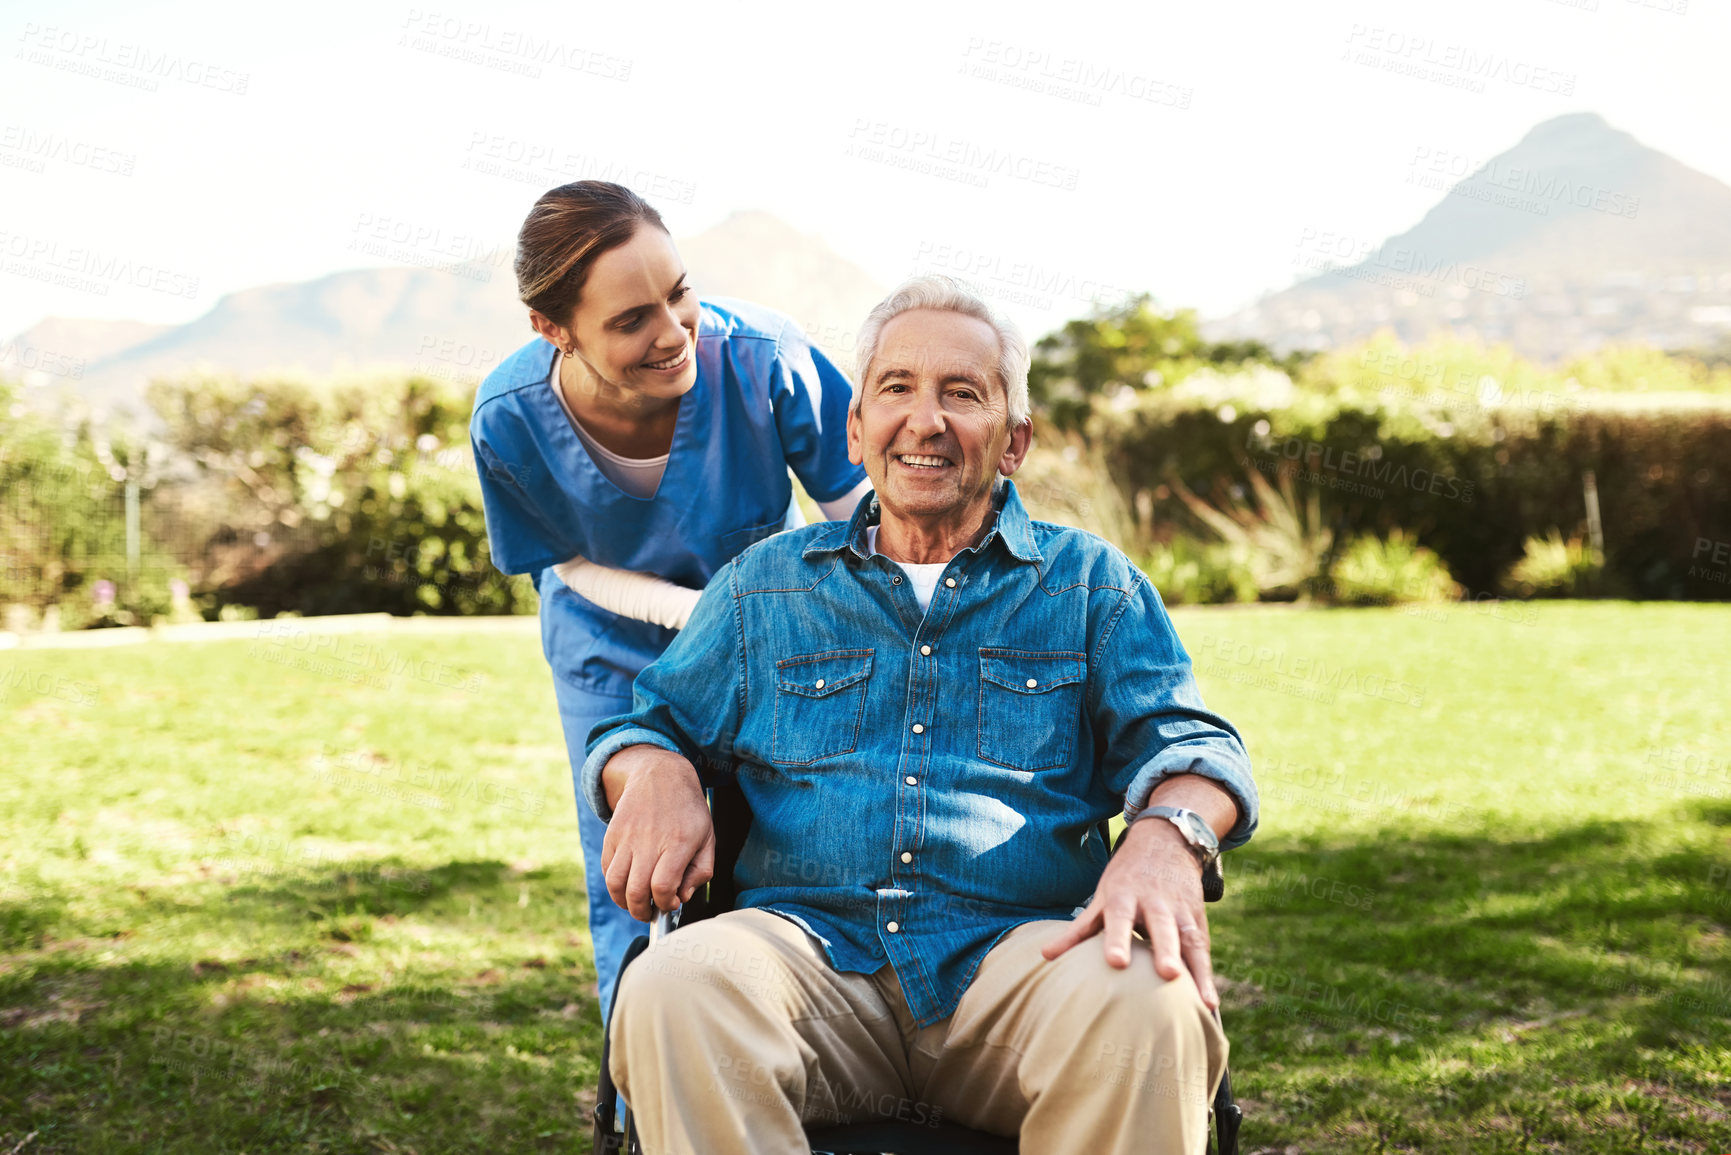 Buy stock photo Cropped shot of a young female nurse outside with a senior patient in a wheelchair